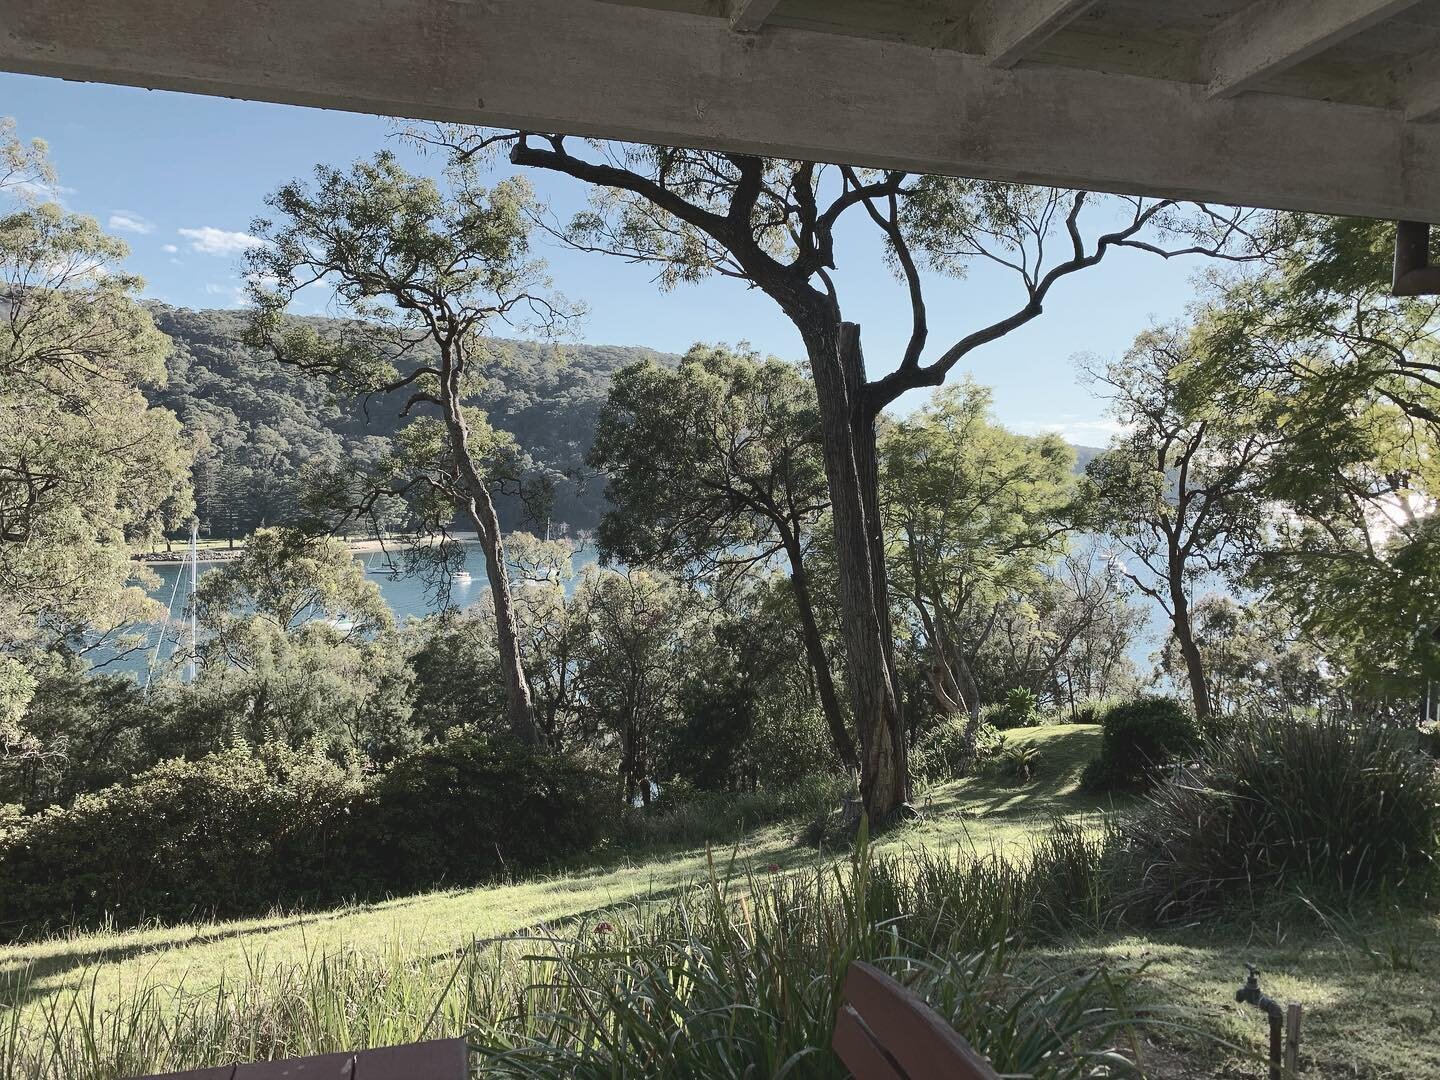 OUTLOOK | Stunning views from onsite today at one of our latest projects. .
.
.
.
.
#kensitarchitects #architecture #arch #architecturephotography #architecturedesign #architect #architectural #architecture_hunter #archilovers #sydney #sydneyarchitec